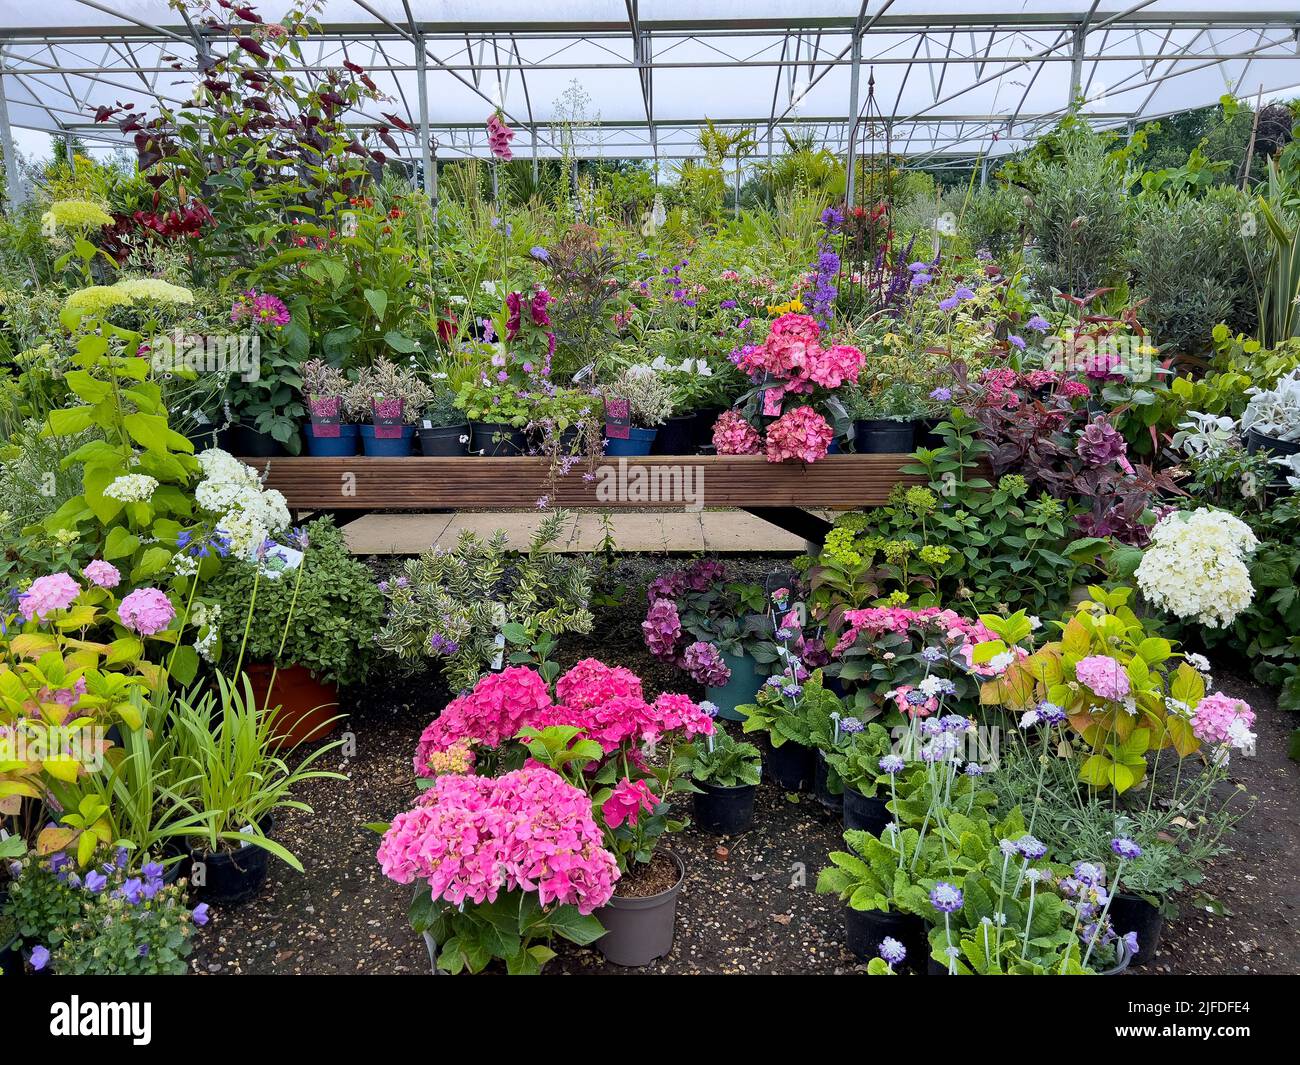 Plants growing under cover at a horticultural center in the United Kingdom. Stock Photo